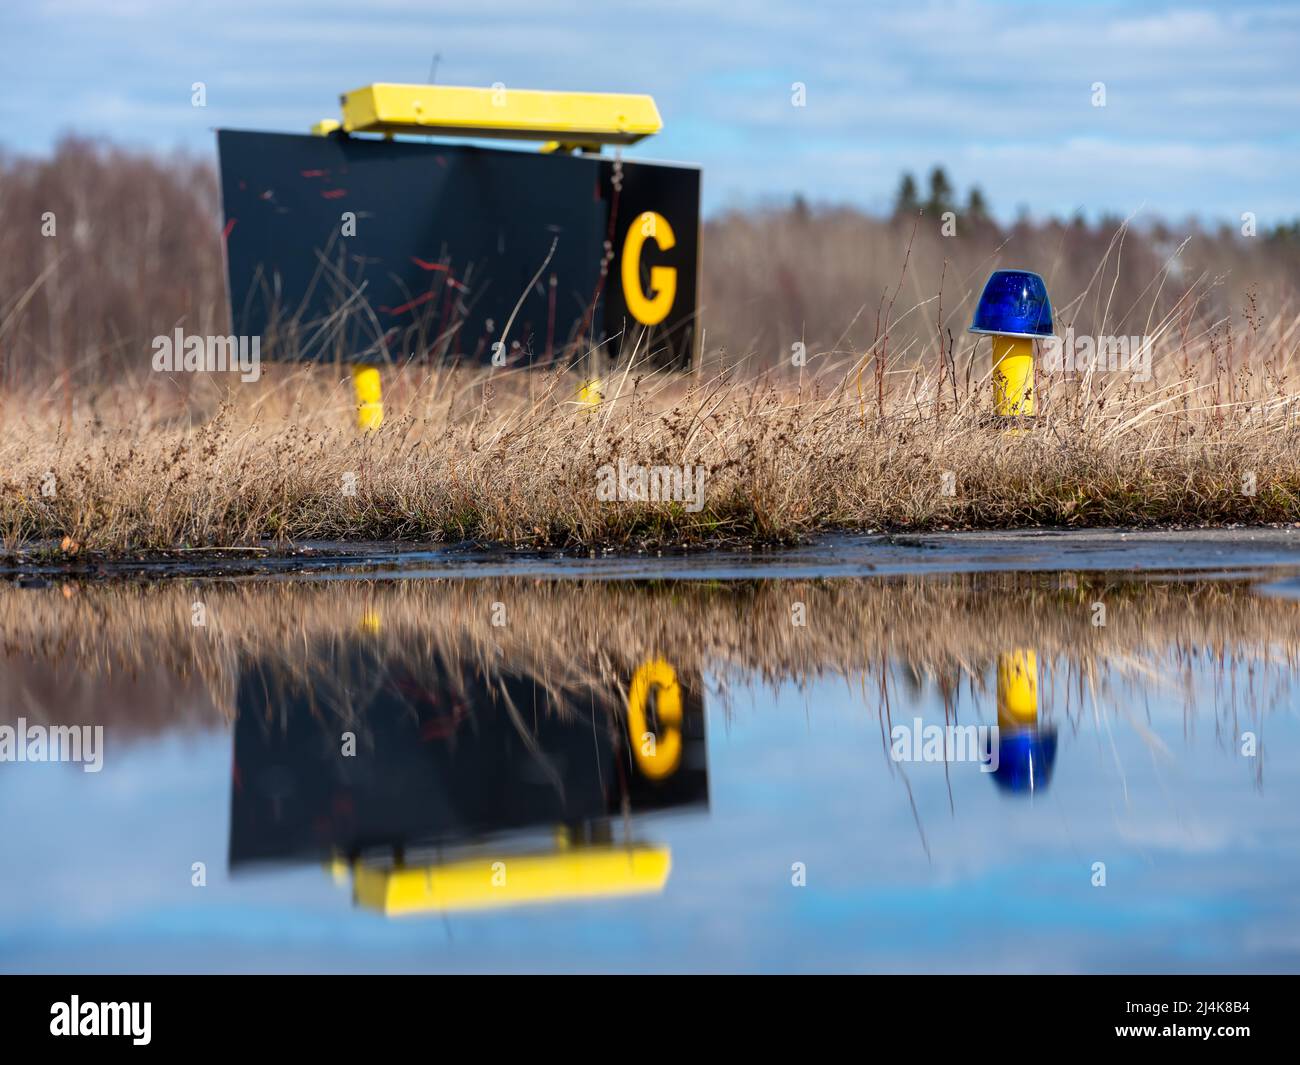 Helsinki / Finland - APRIL 16, 2022: Closeup of a blue airport taxiway light with taziway G sign in the background. Reflection on the water. Stock Photo